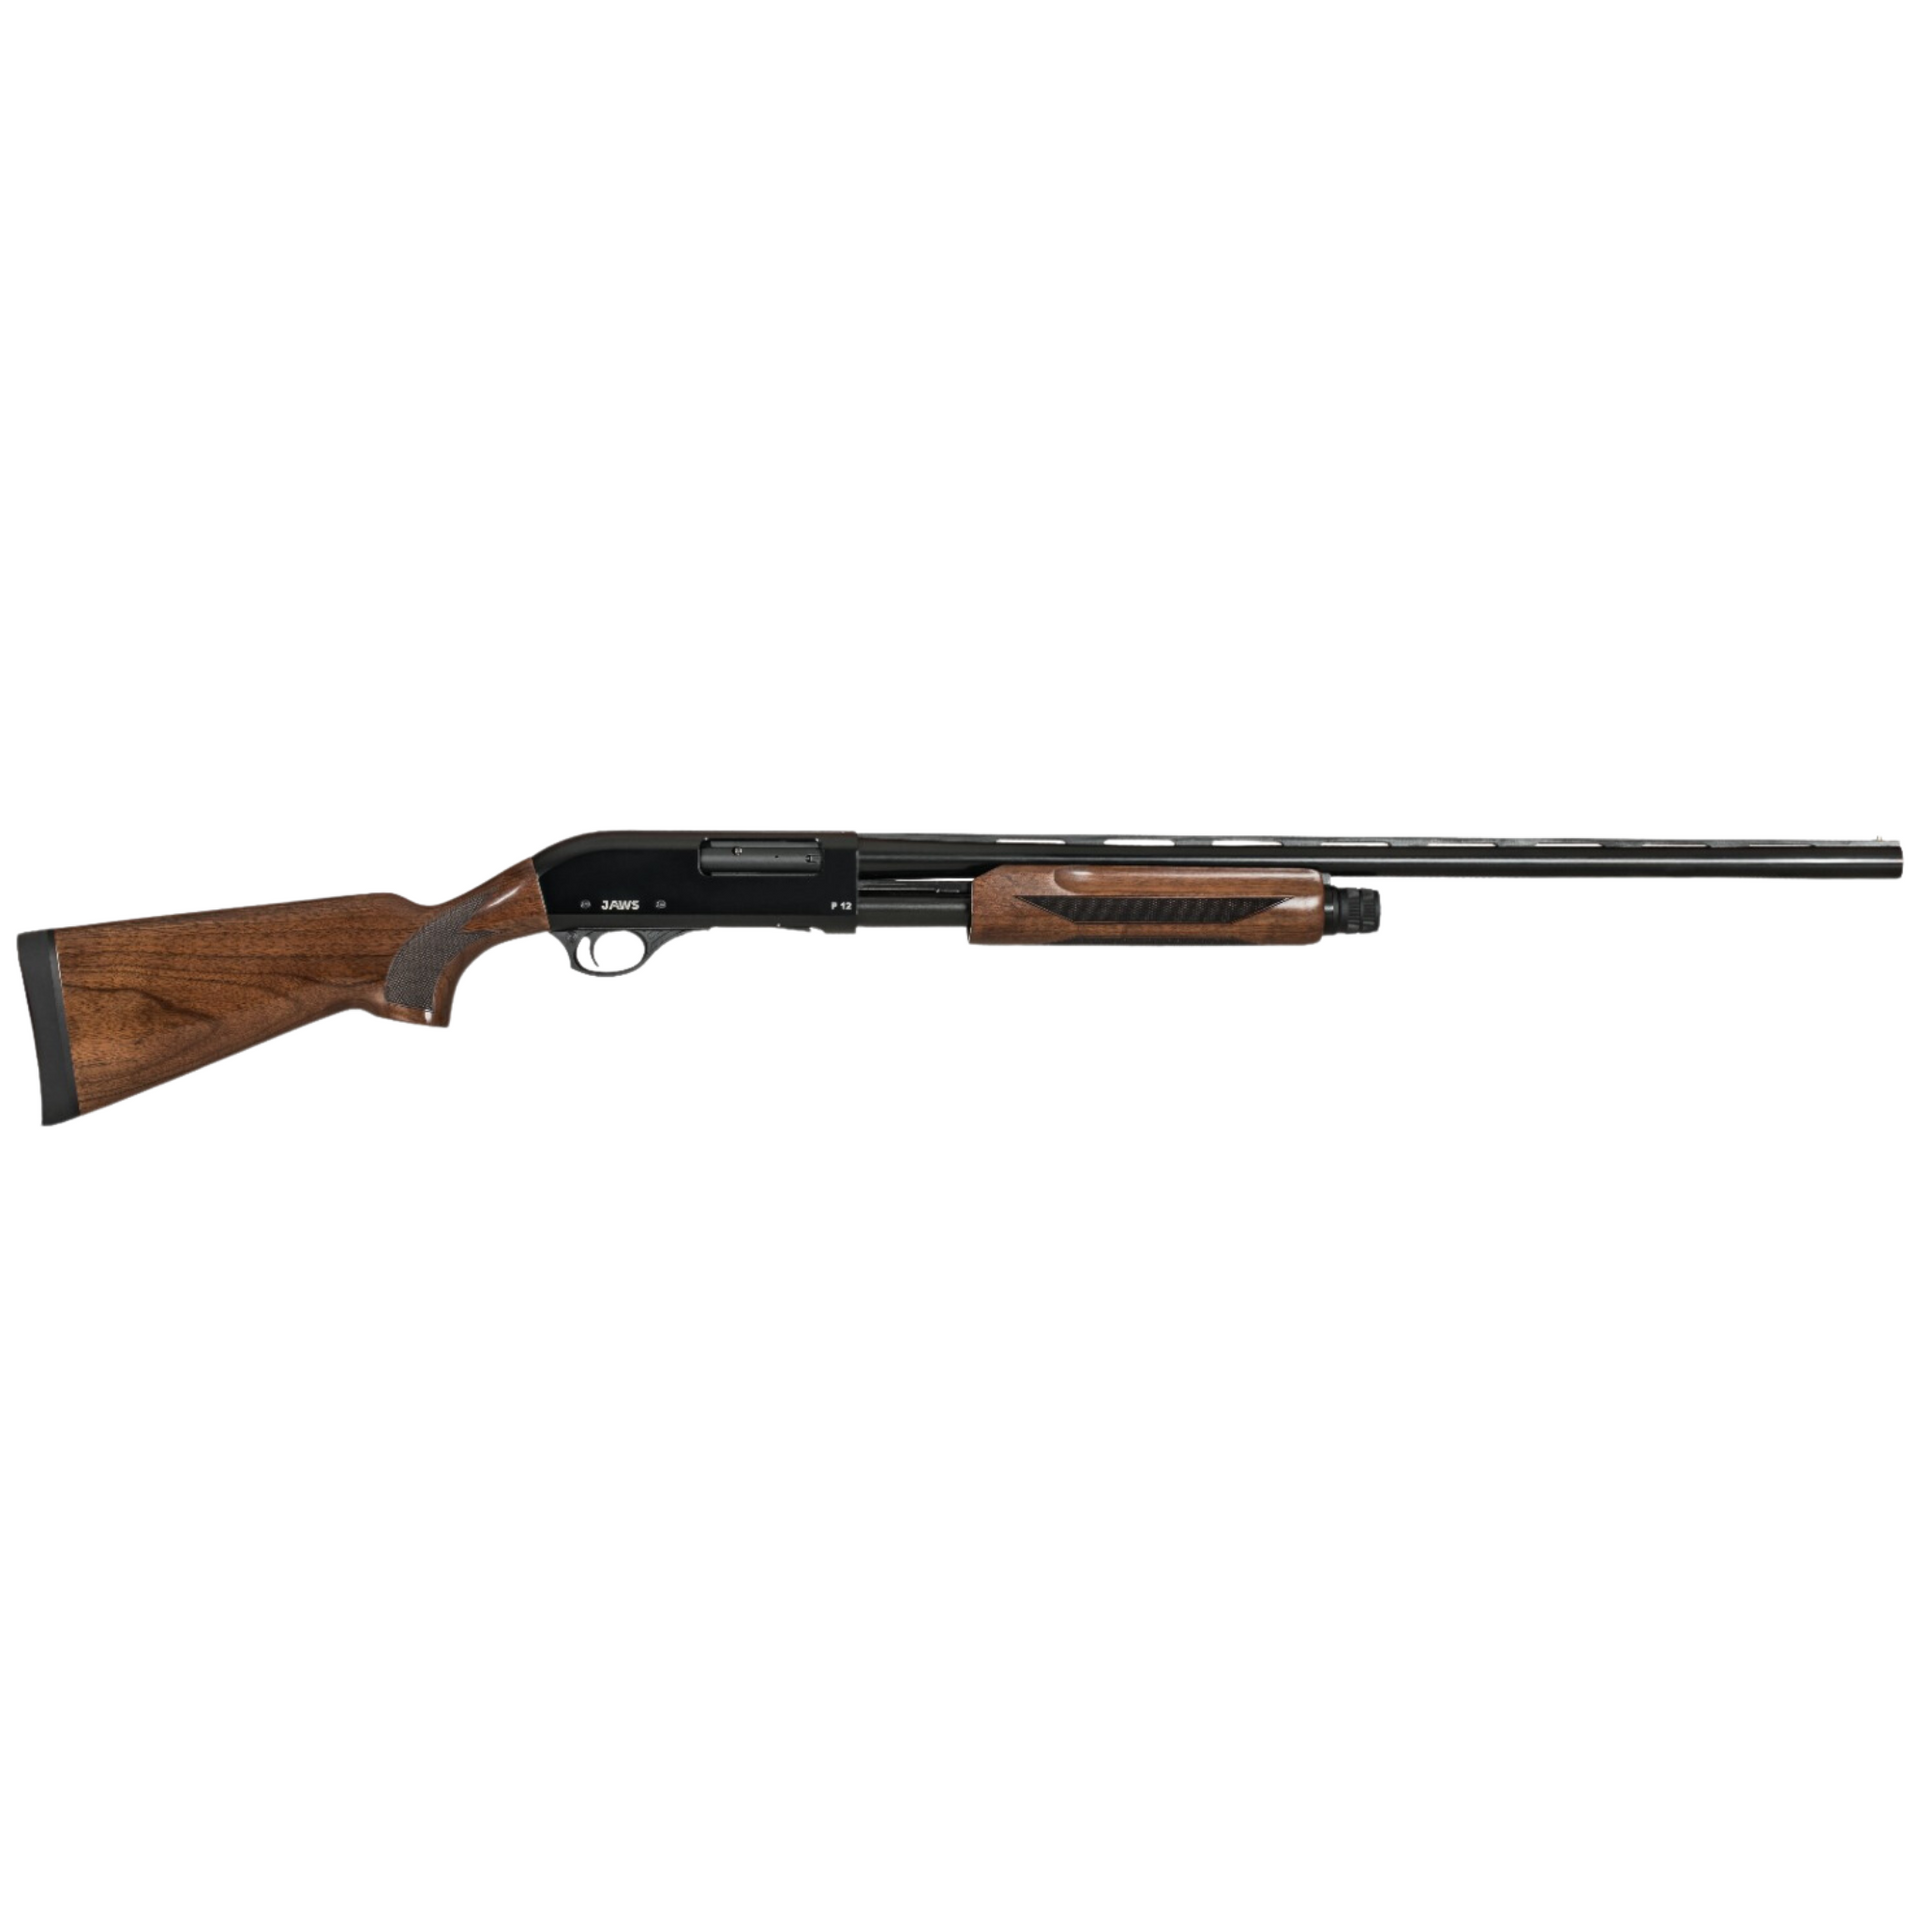 Saricam PA-12, Pump Action, Walnut, 28 in barrel 48 in overall.